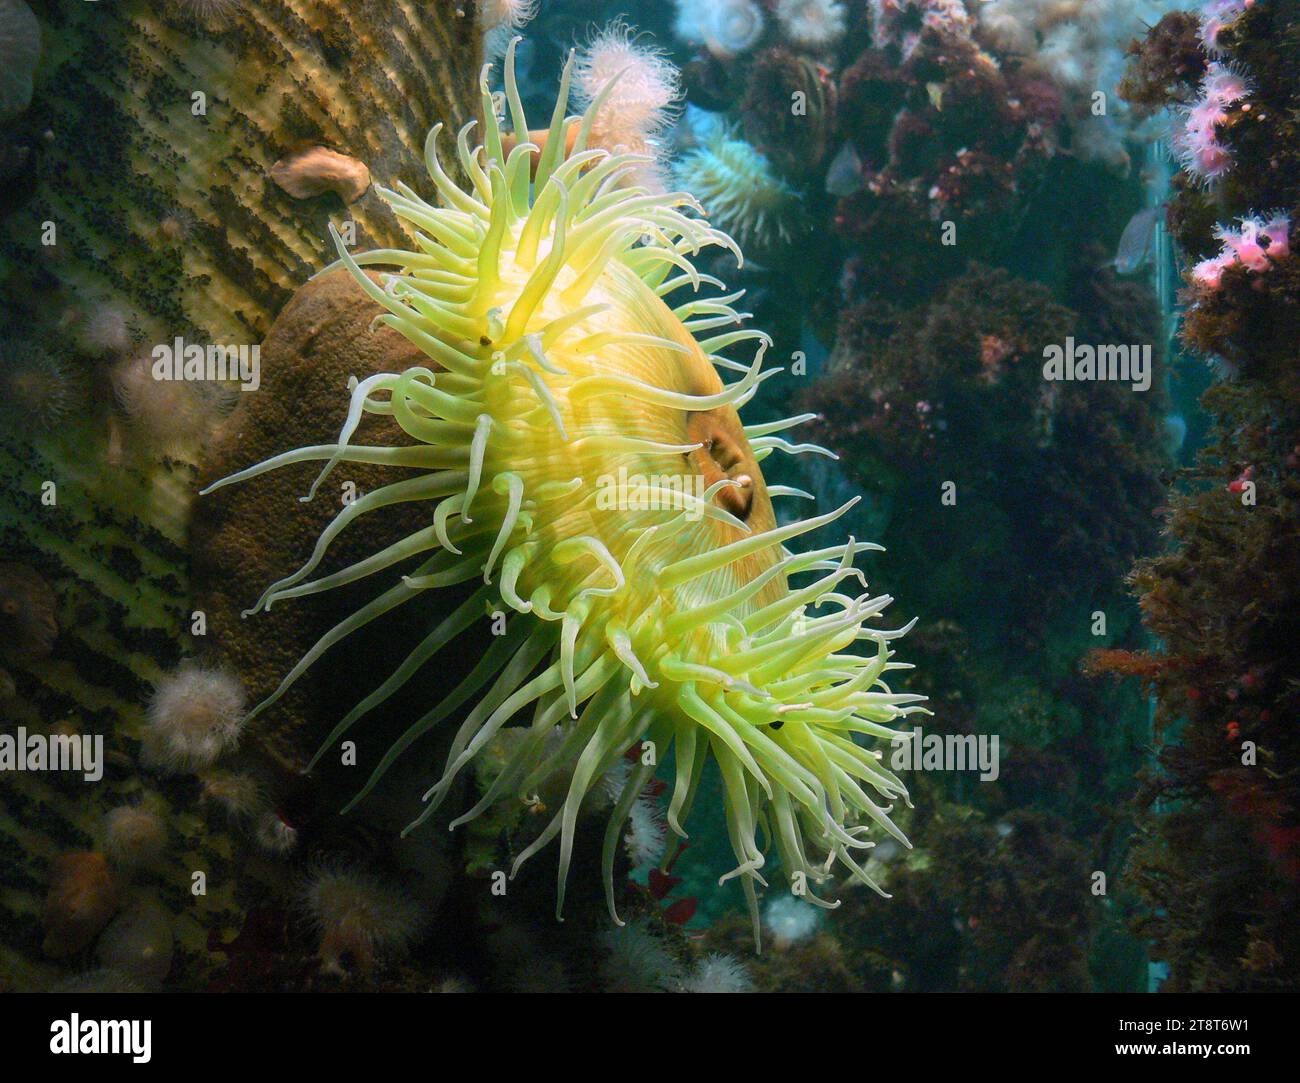 Sea anemones, A close relative of coral and jellyfish, anemones are stinging polyps that spend most of their time attached to rocks on the sea bottom or on coral reefs waiting for fish to pass close enough to get ensnared in their venom-filled tentacles Stock Photo